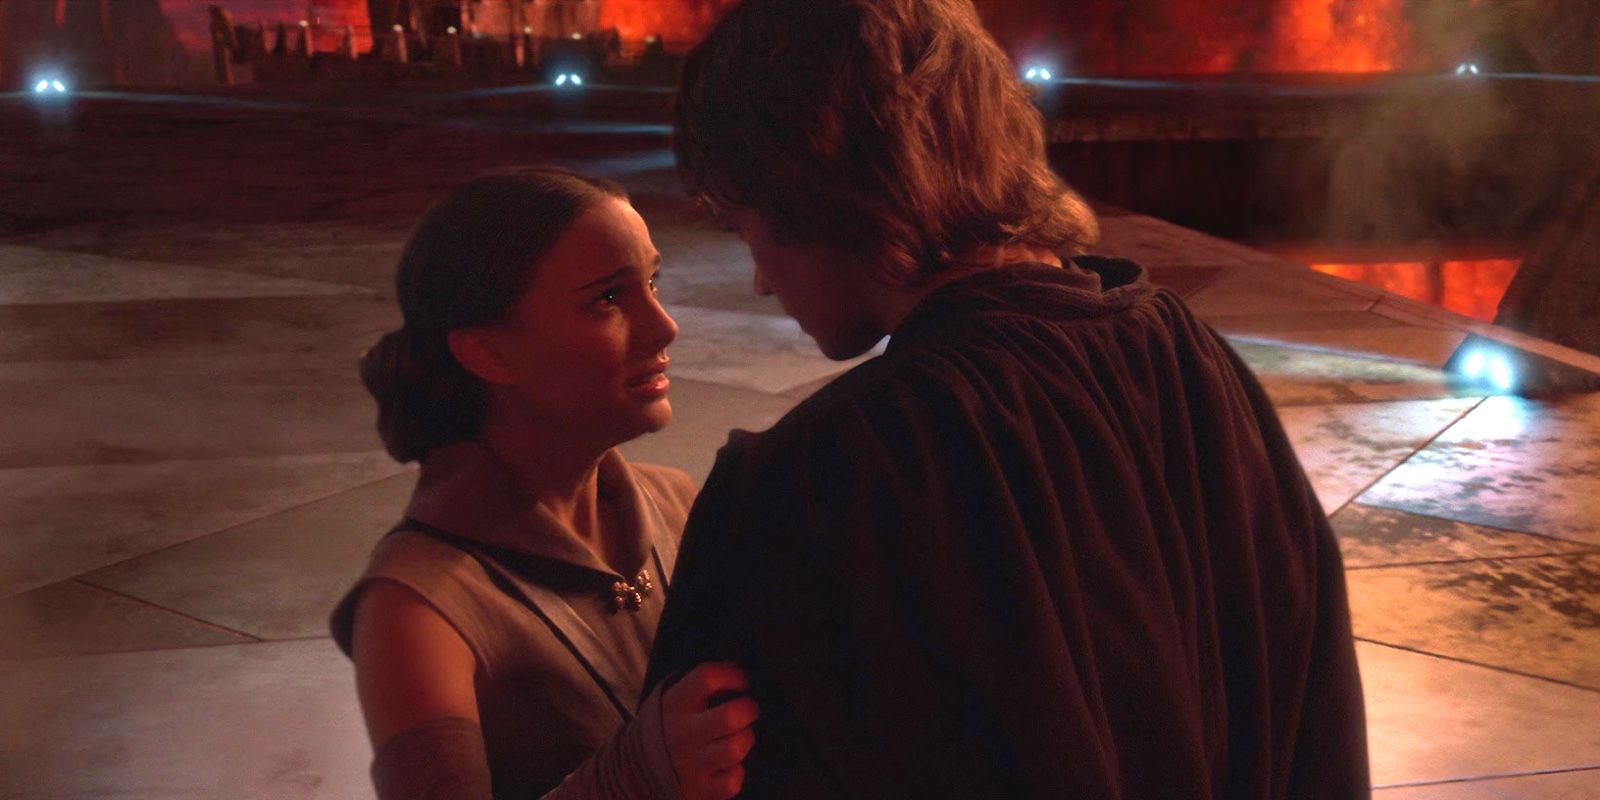 Padme tries to convince Anakin to stop going down a dark path in Revenge of the Sith